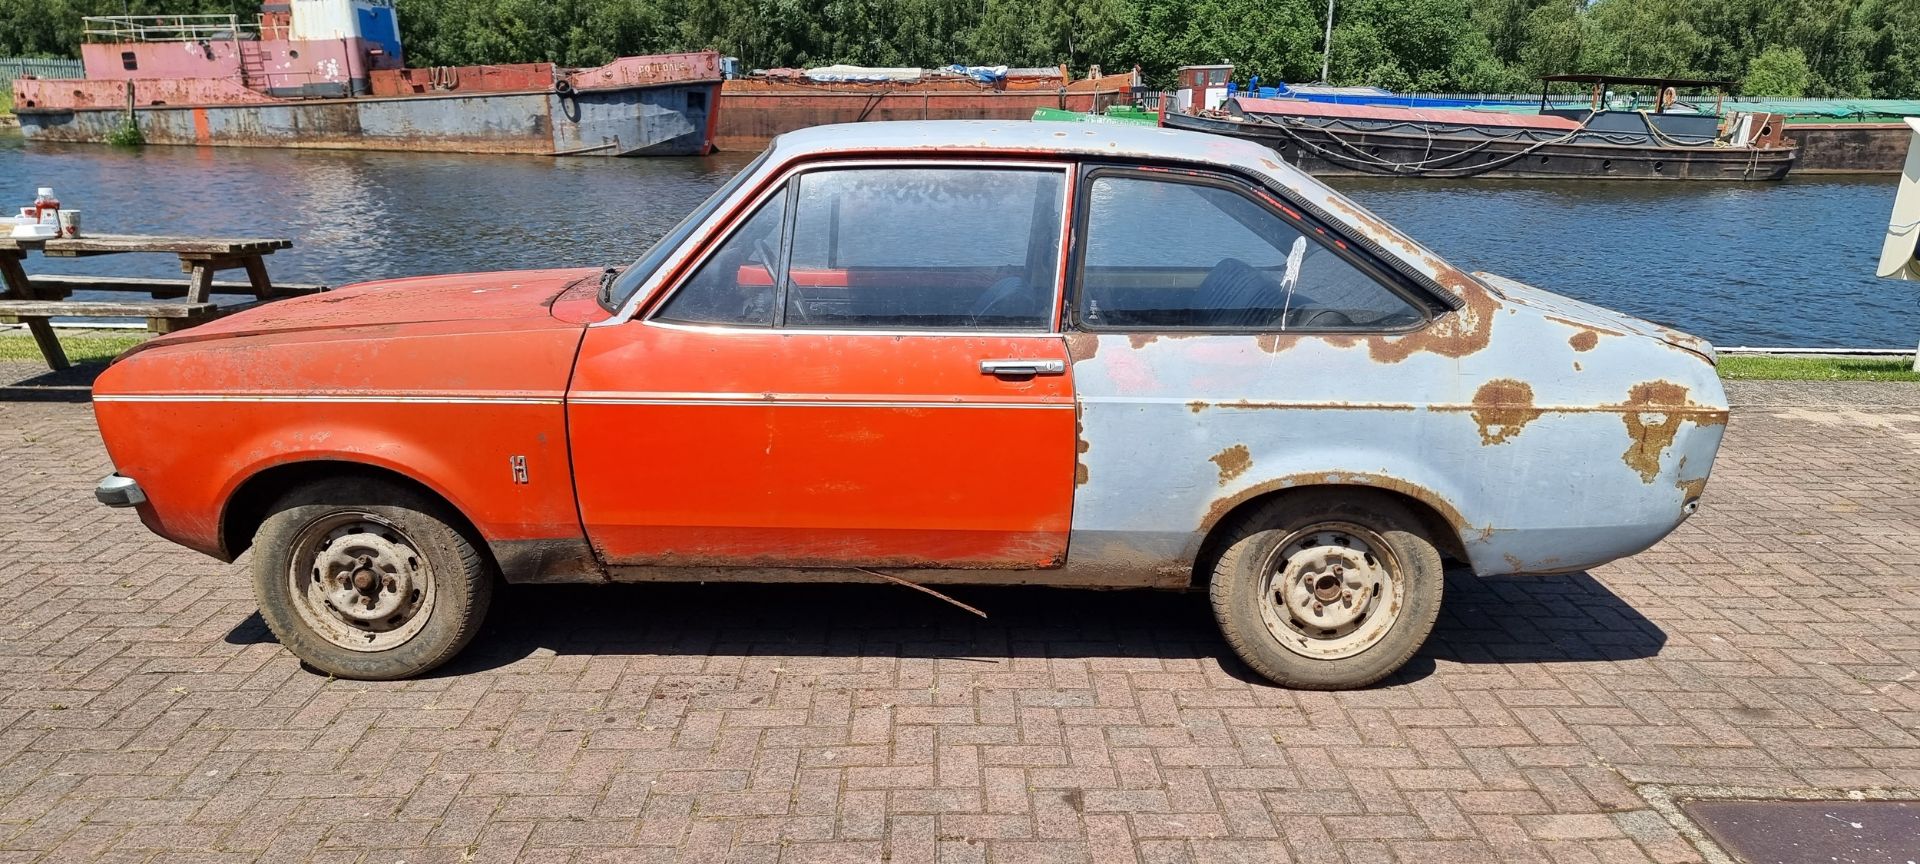 1975 Ford Escort 1.3L, 2 door, 1298cc, project. Registration number LDX 738P. Chassis number - Image 4 of 13